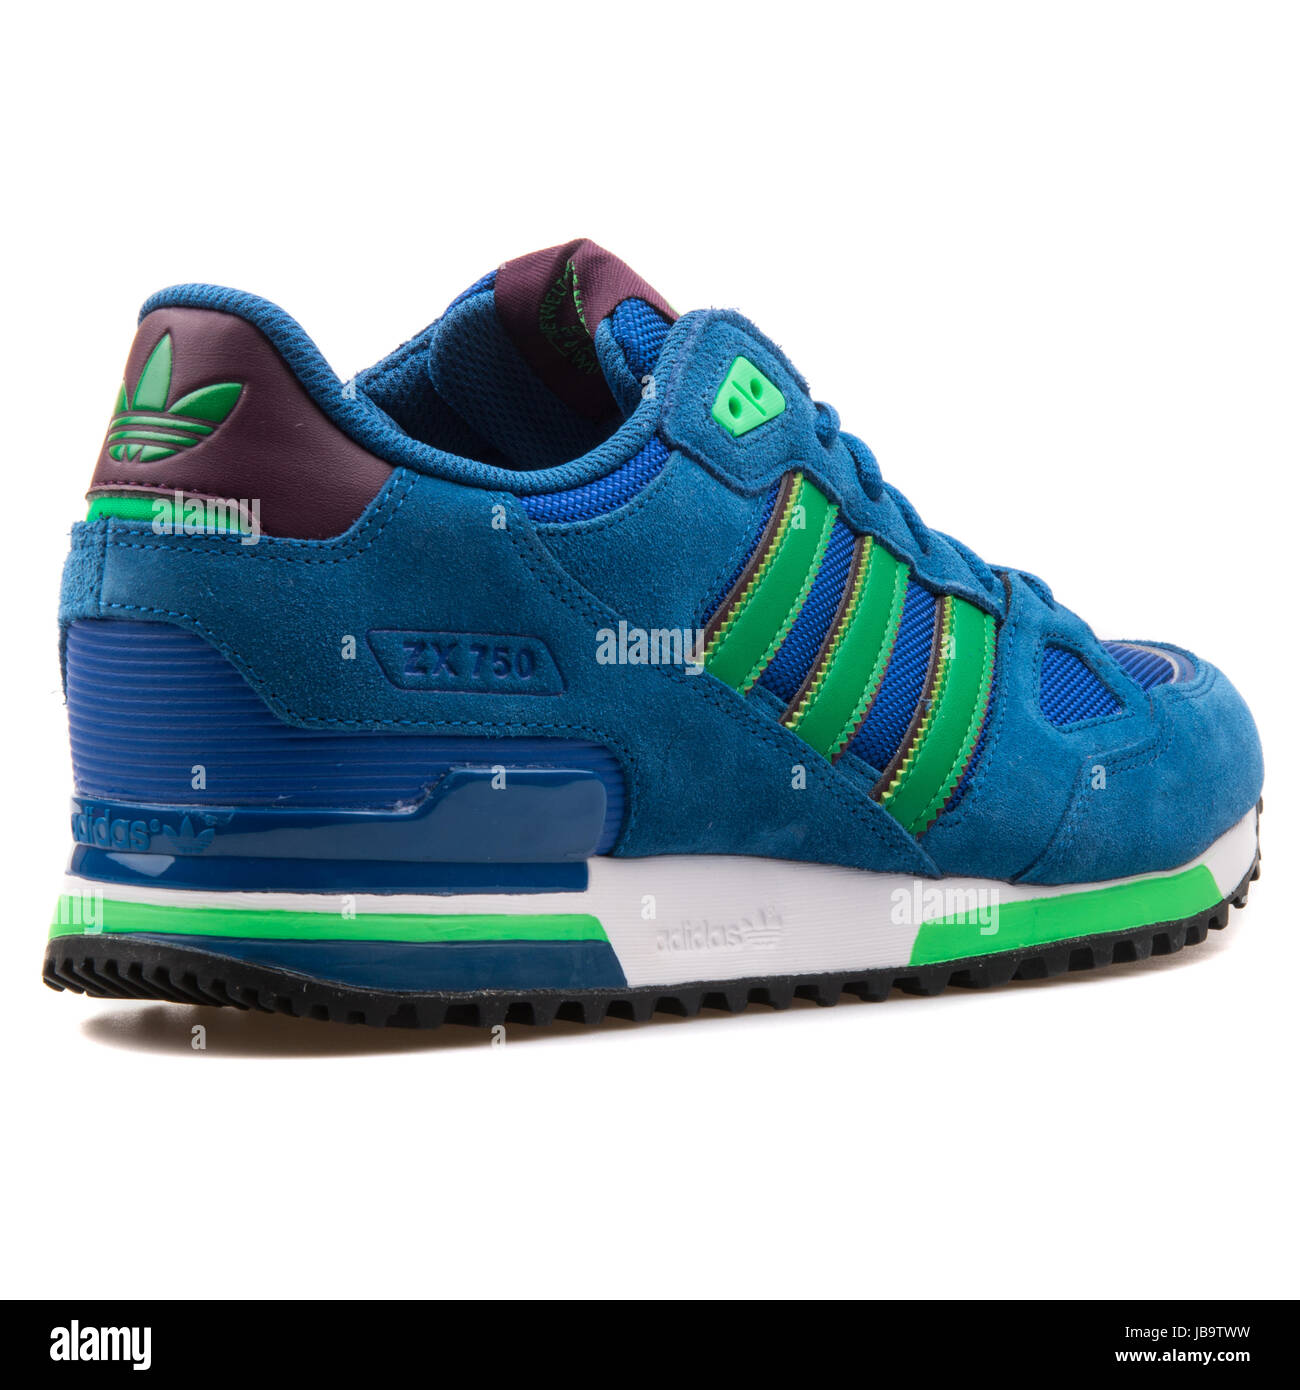 Adidas ZX 750 Blue and Green Men's Sports Sneakers - B24857 Stock Photo -  Alamy